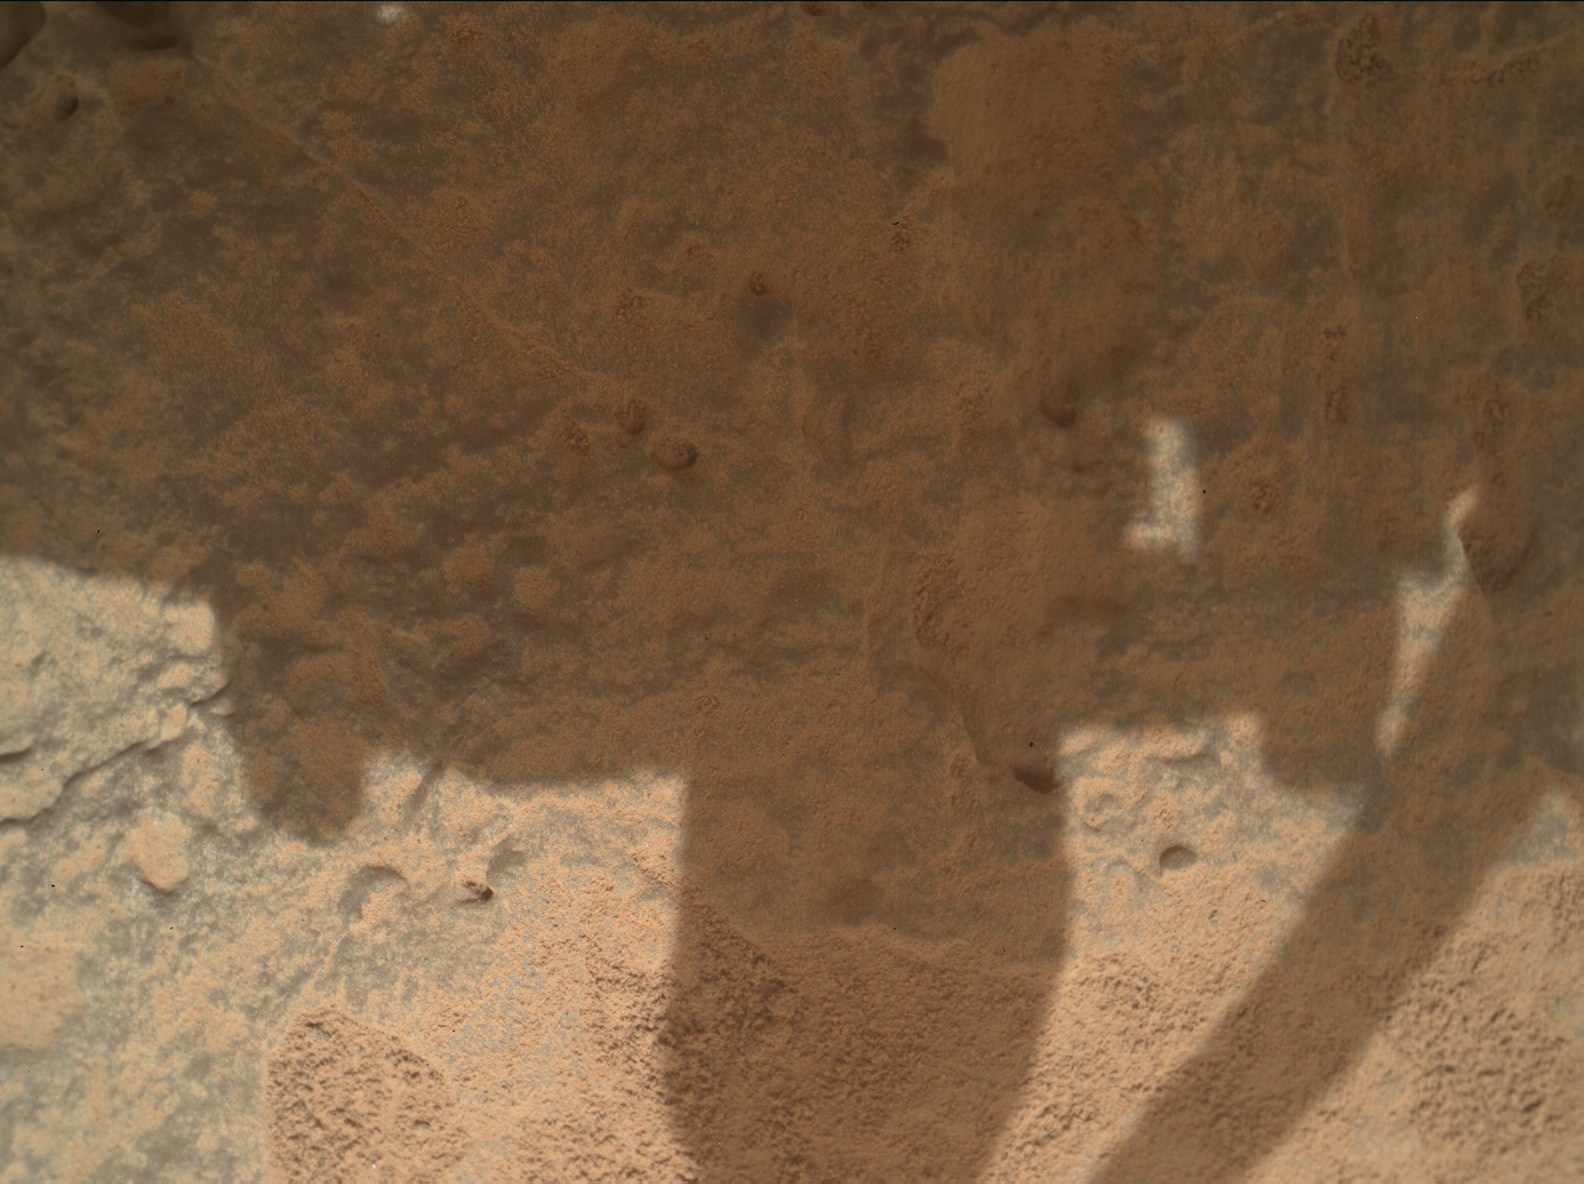 Nasa's Mars rover Curiosity acquired this image using its Mars Hand Lens Imager (MAHLI) on Sol 3688